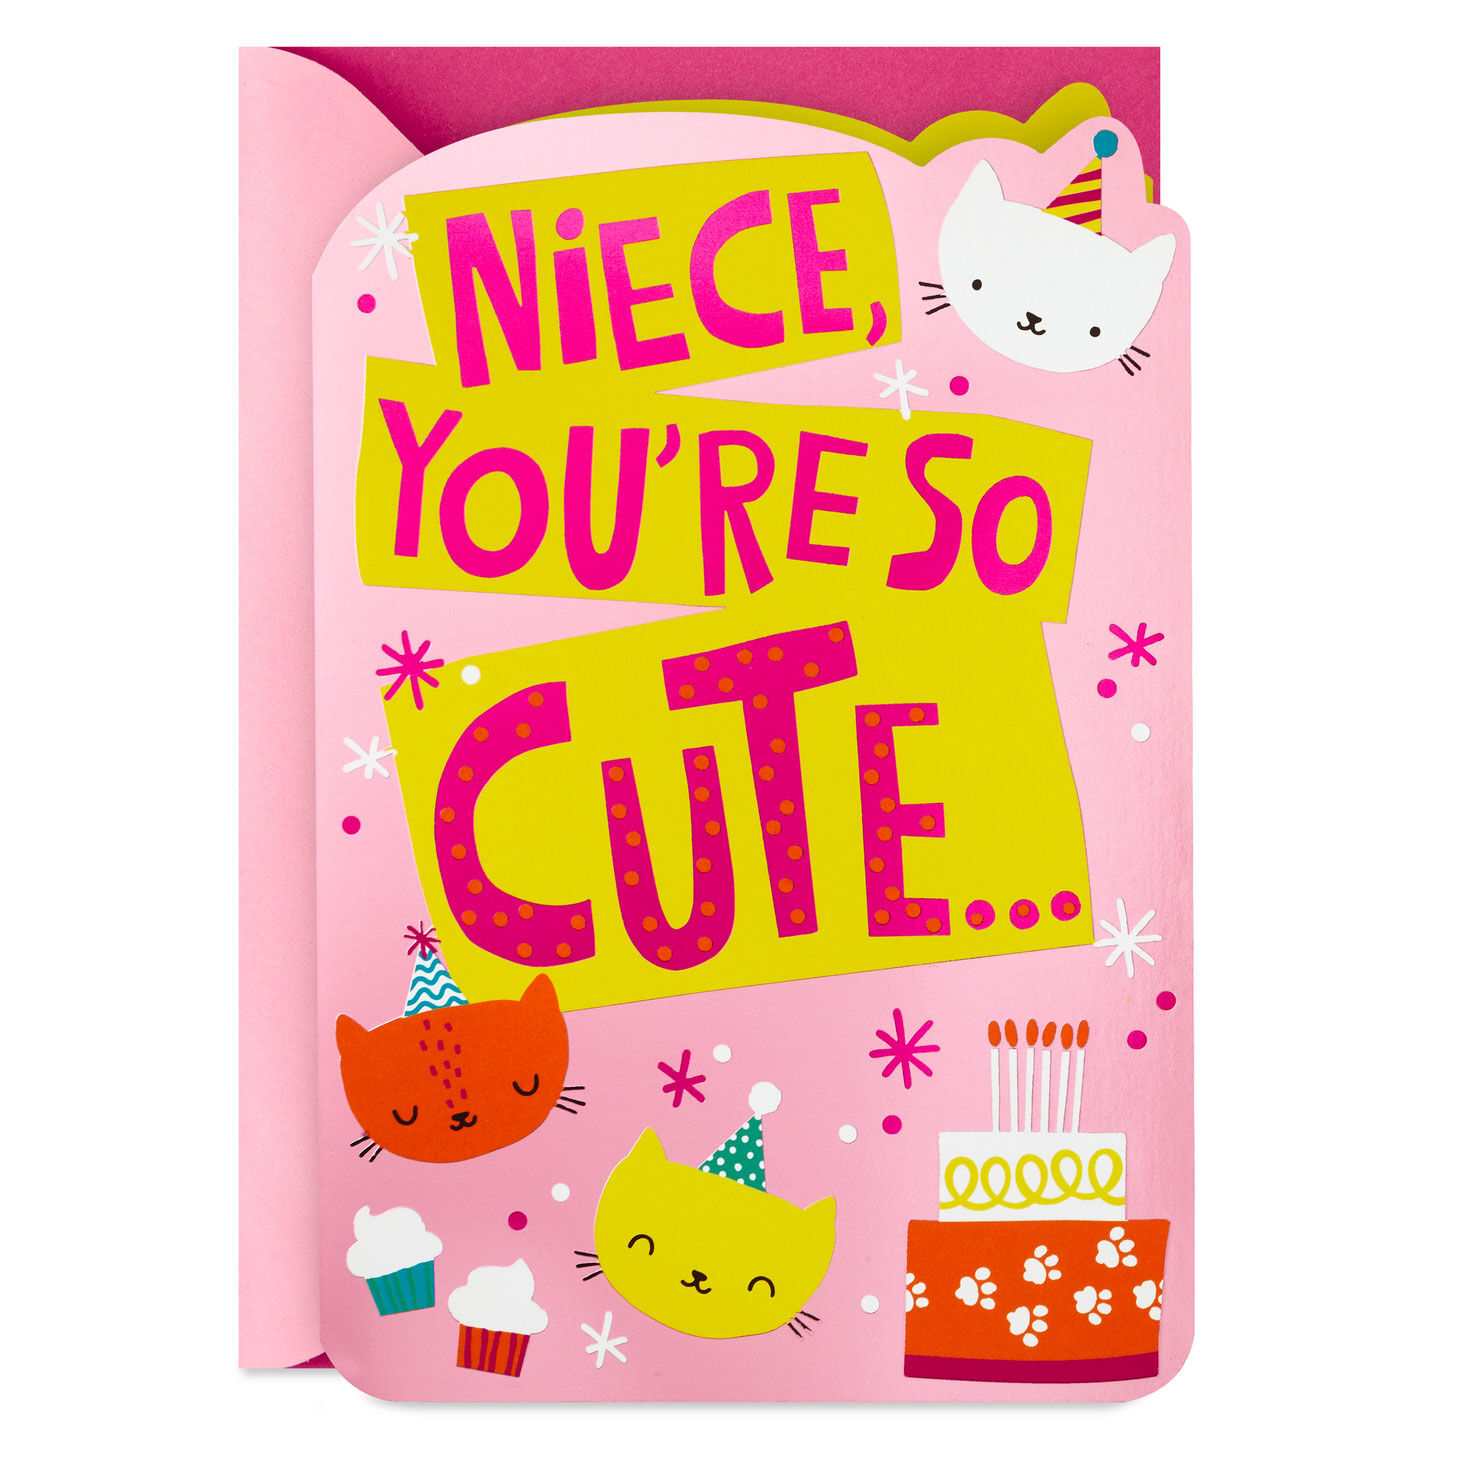 Niece, You're So Cute and Sweet Birthday Card for only USD 3.99 | Hallmark